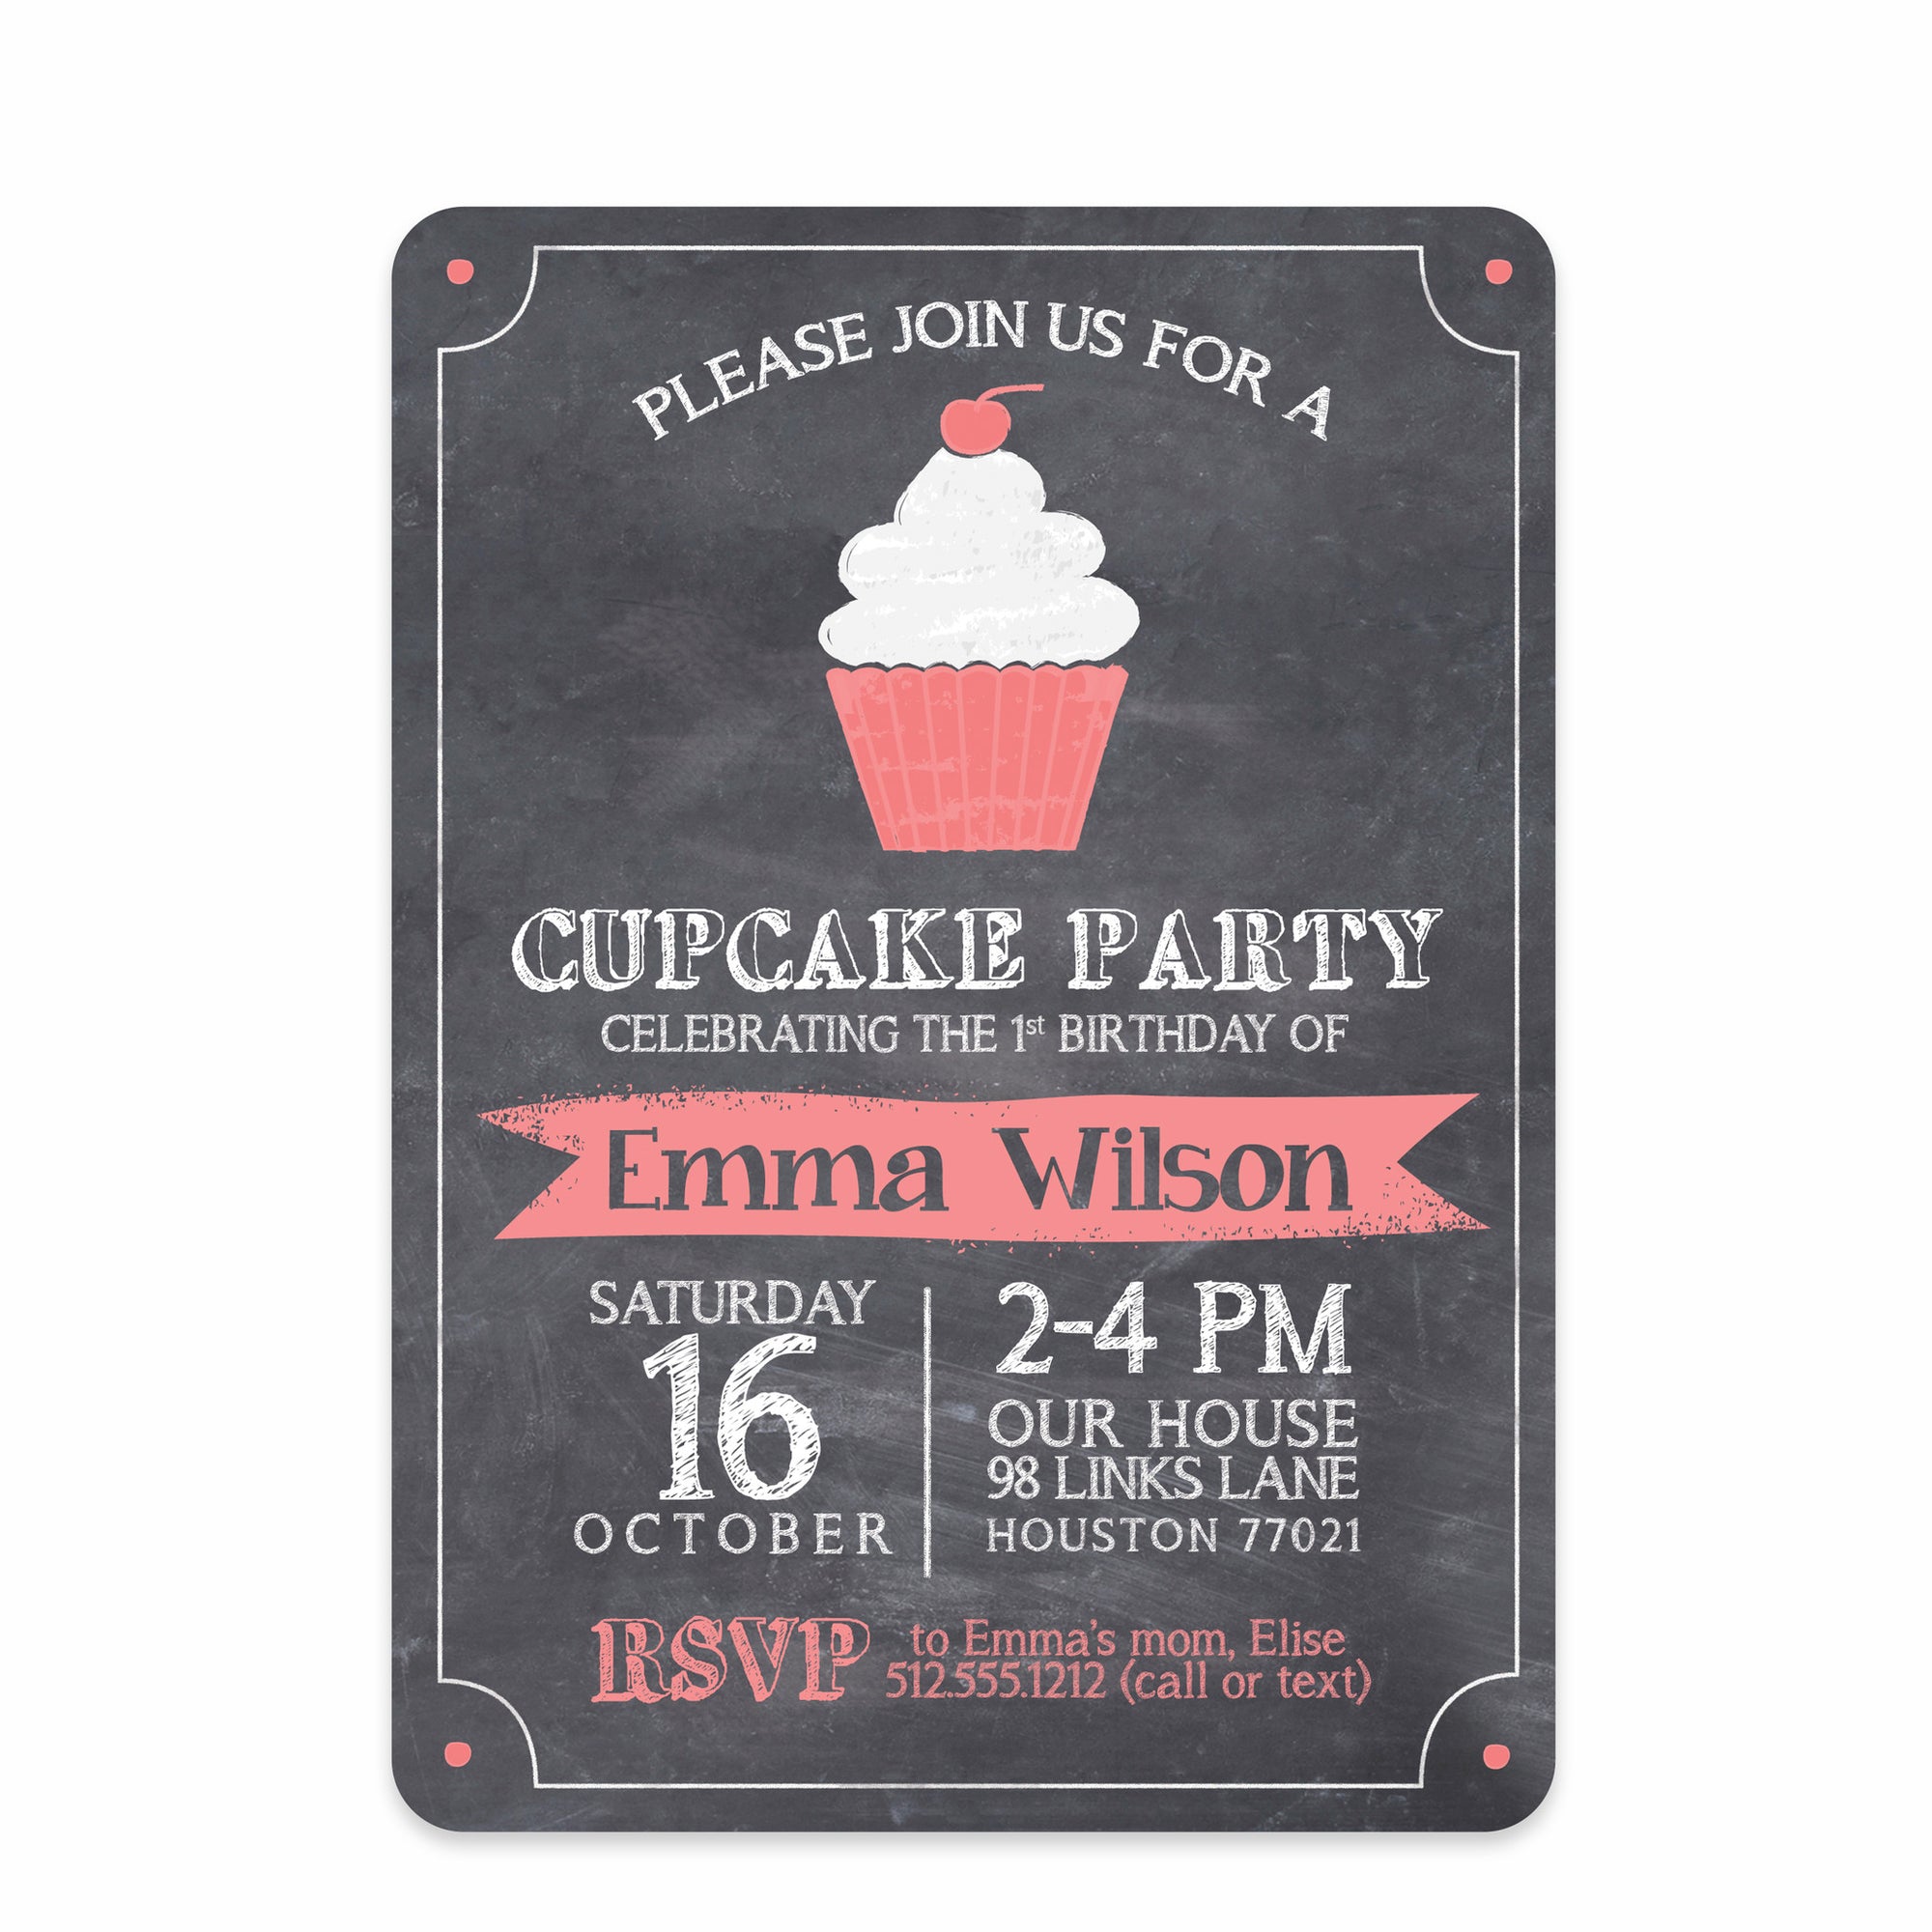 Cupcake Party Invitation | Pipsy.com | Front